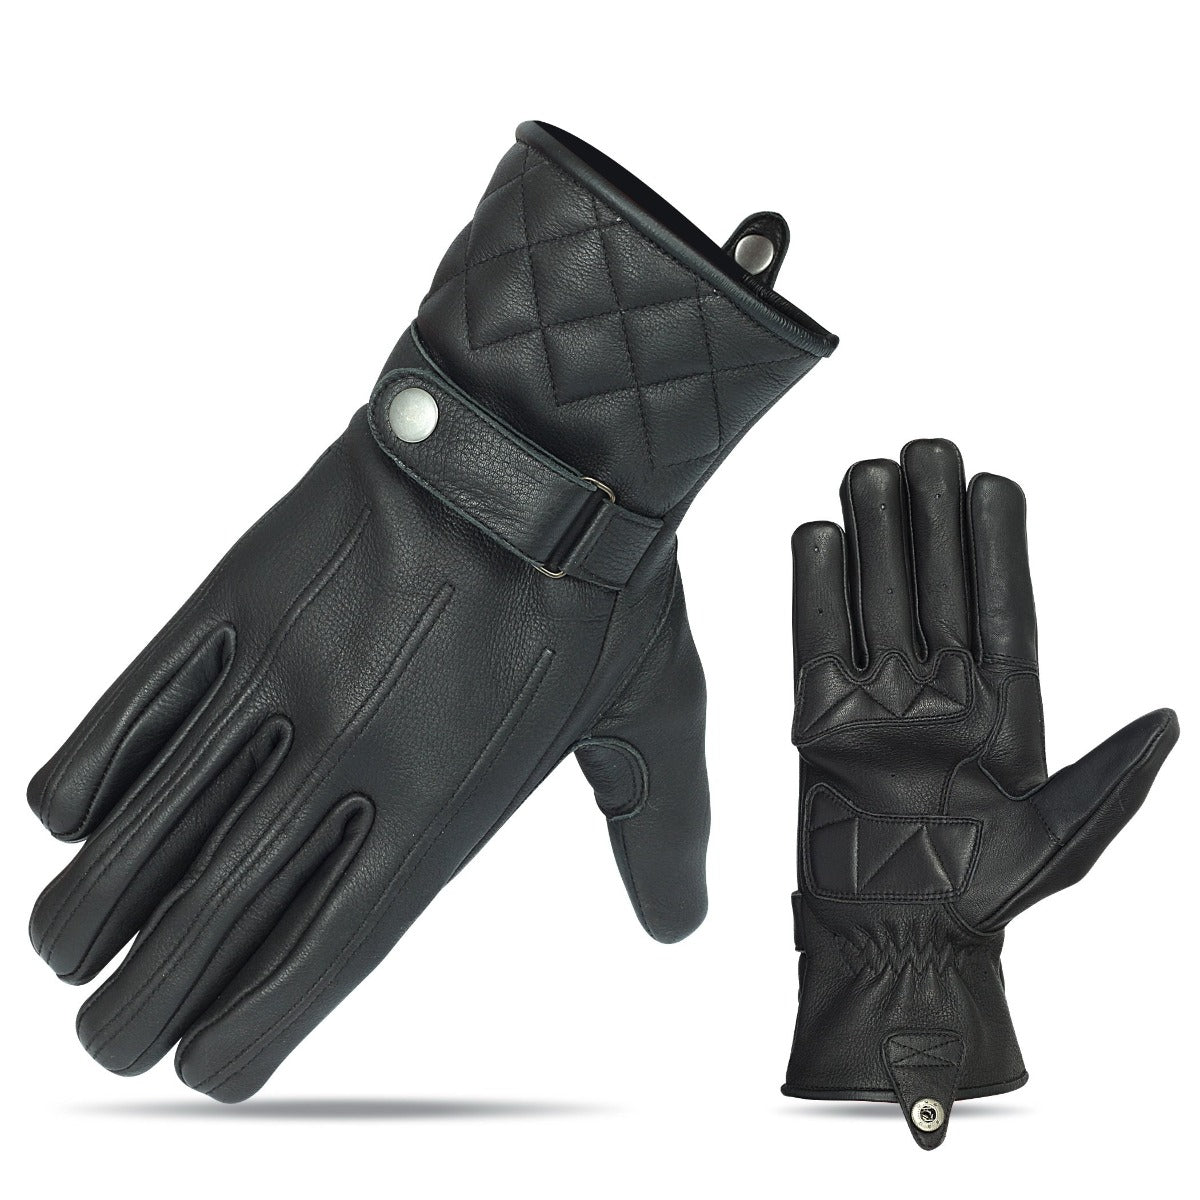 Vance Premium Leather Driving Glove with Snap Cuff